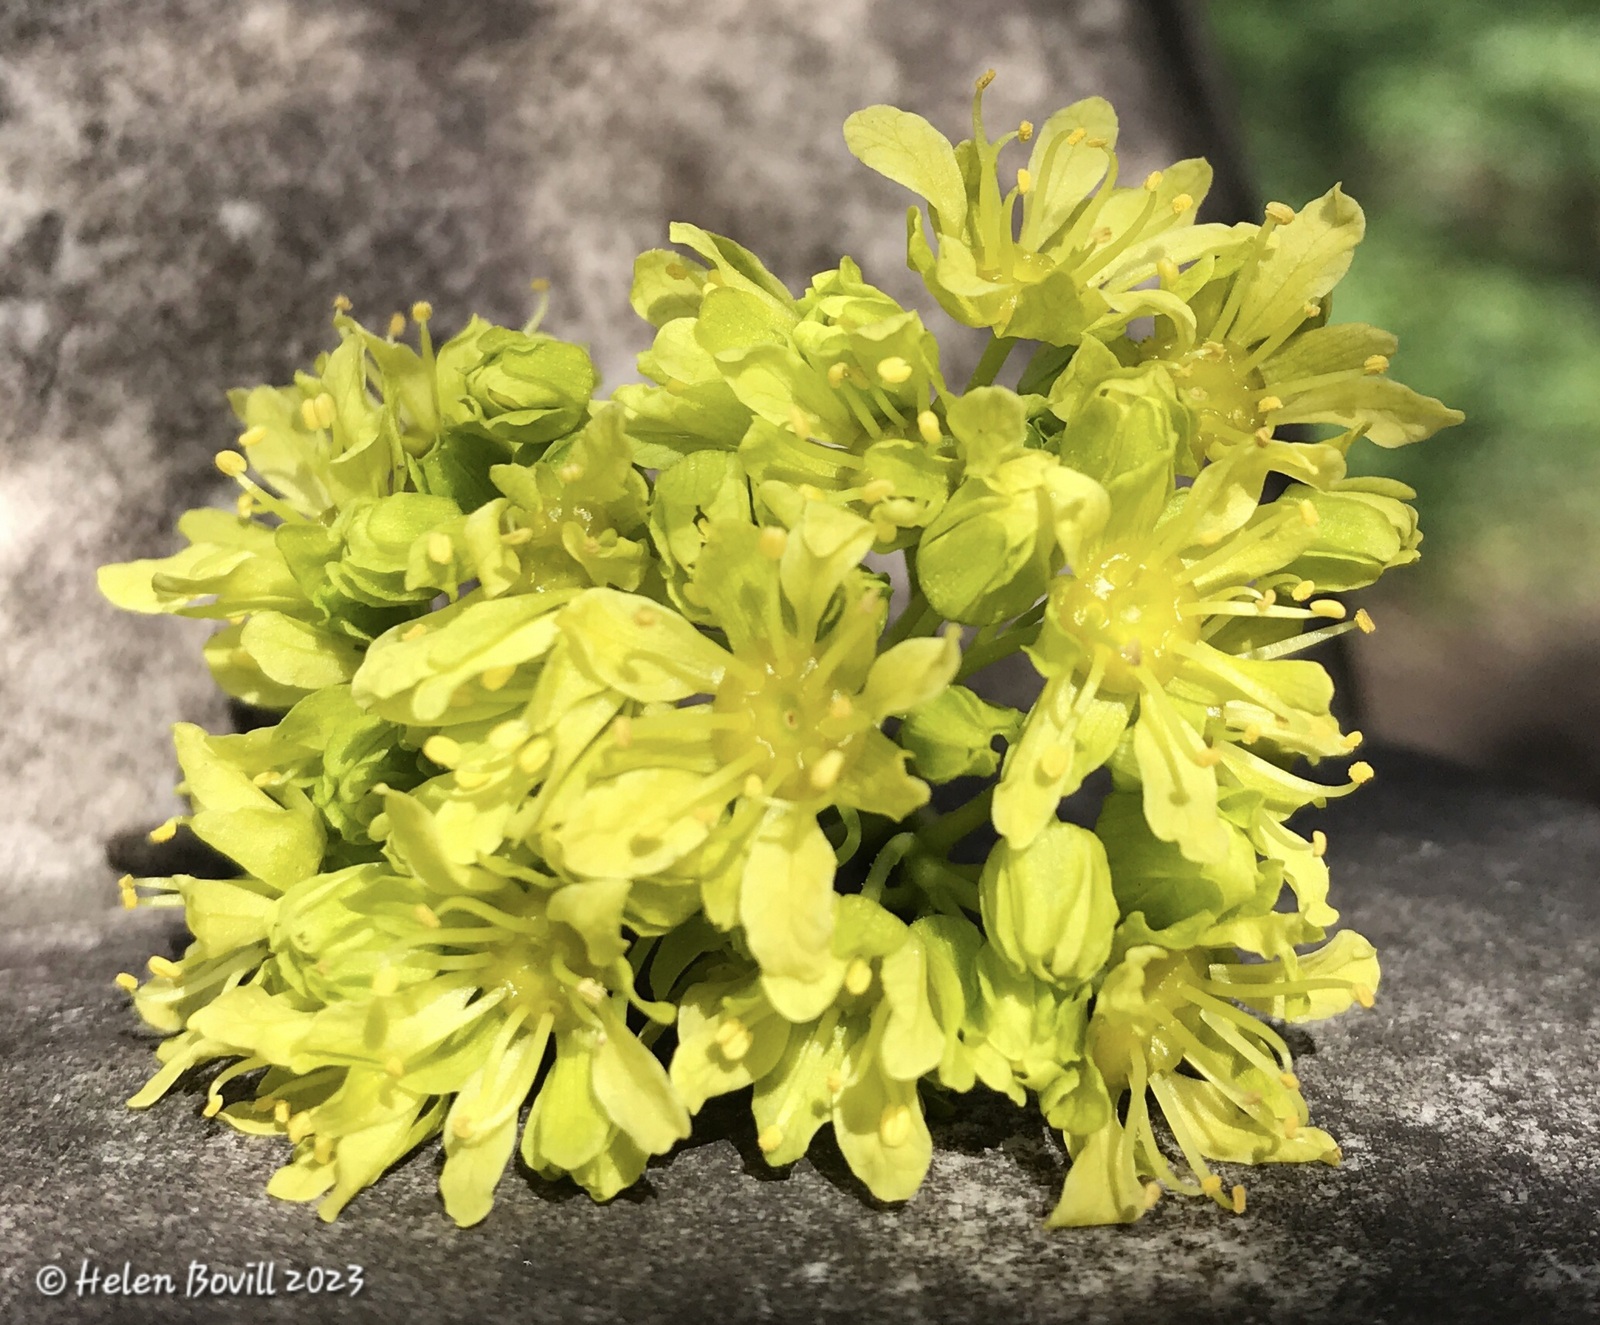 Fallen Norway Maple flowers resting on top of a headstone in the cemetery